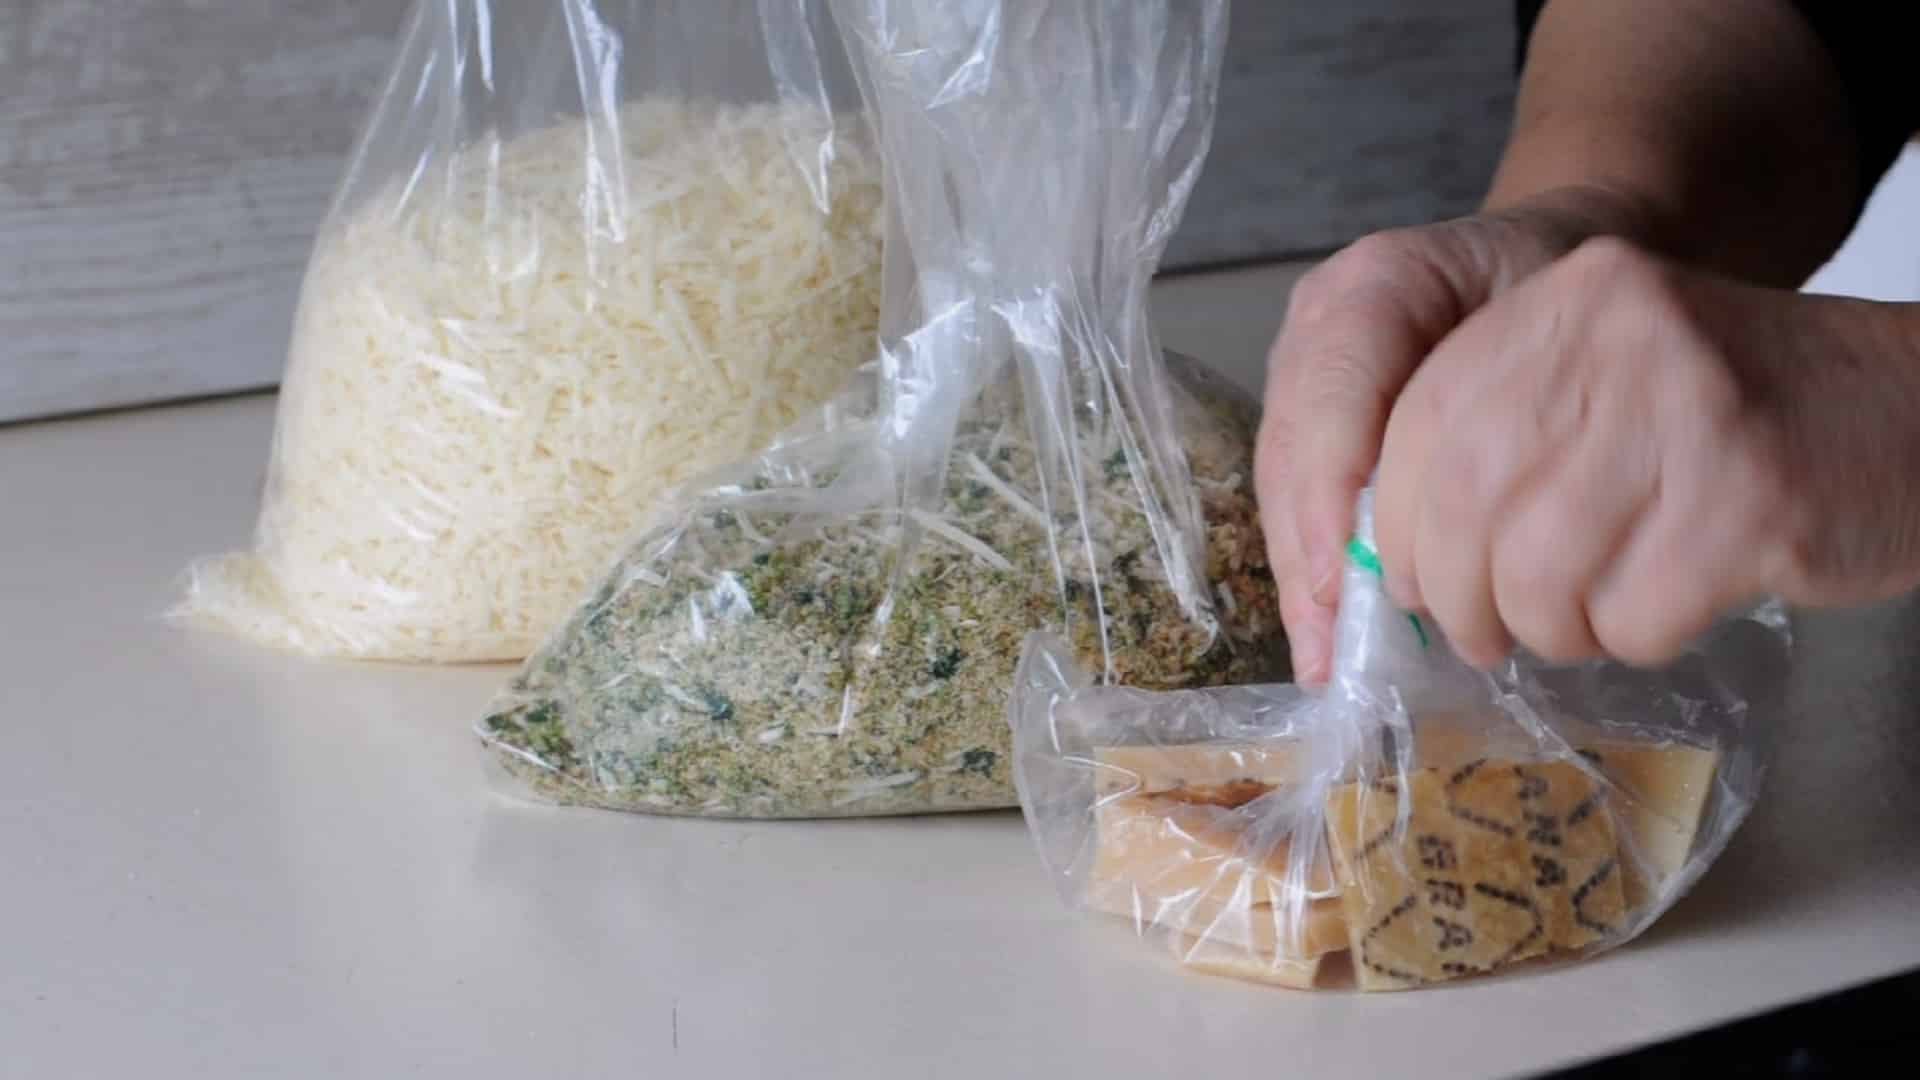 Freeze the Parmesan crust to put in stock or soups